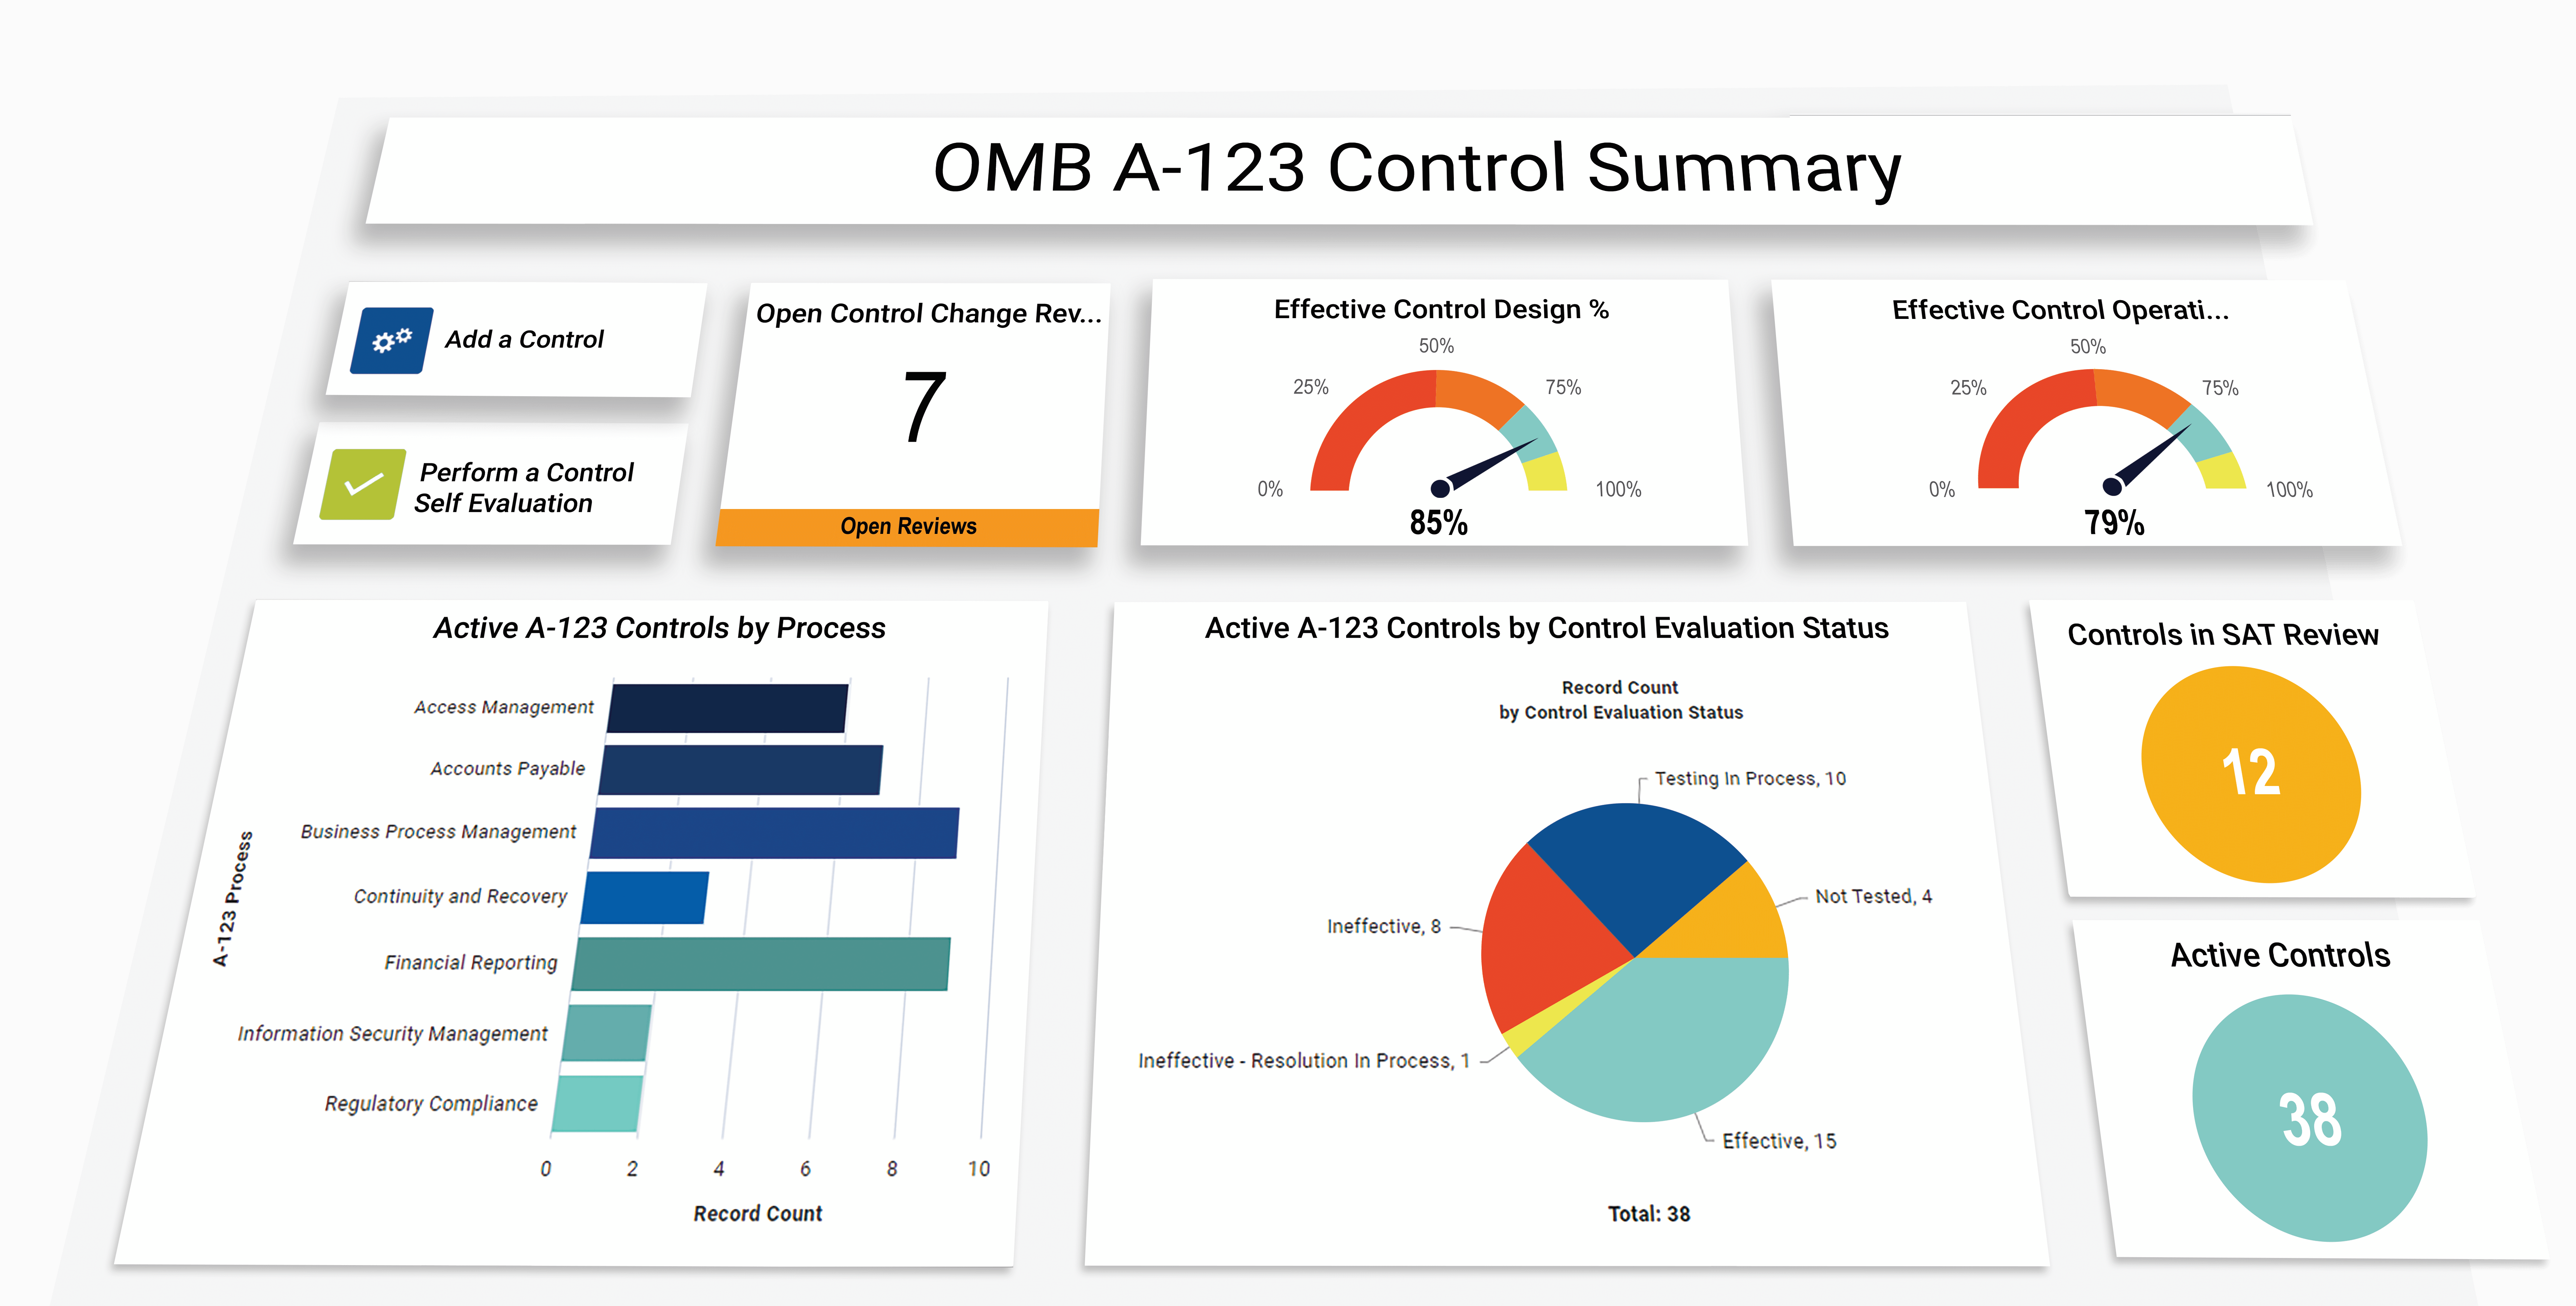 OMB A-123 Control Summary in Onspring GovCloud